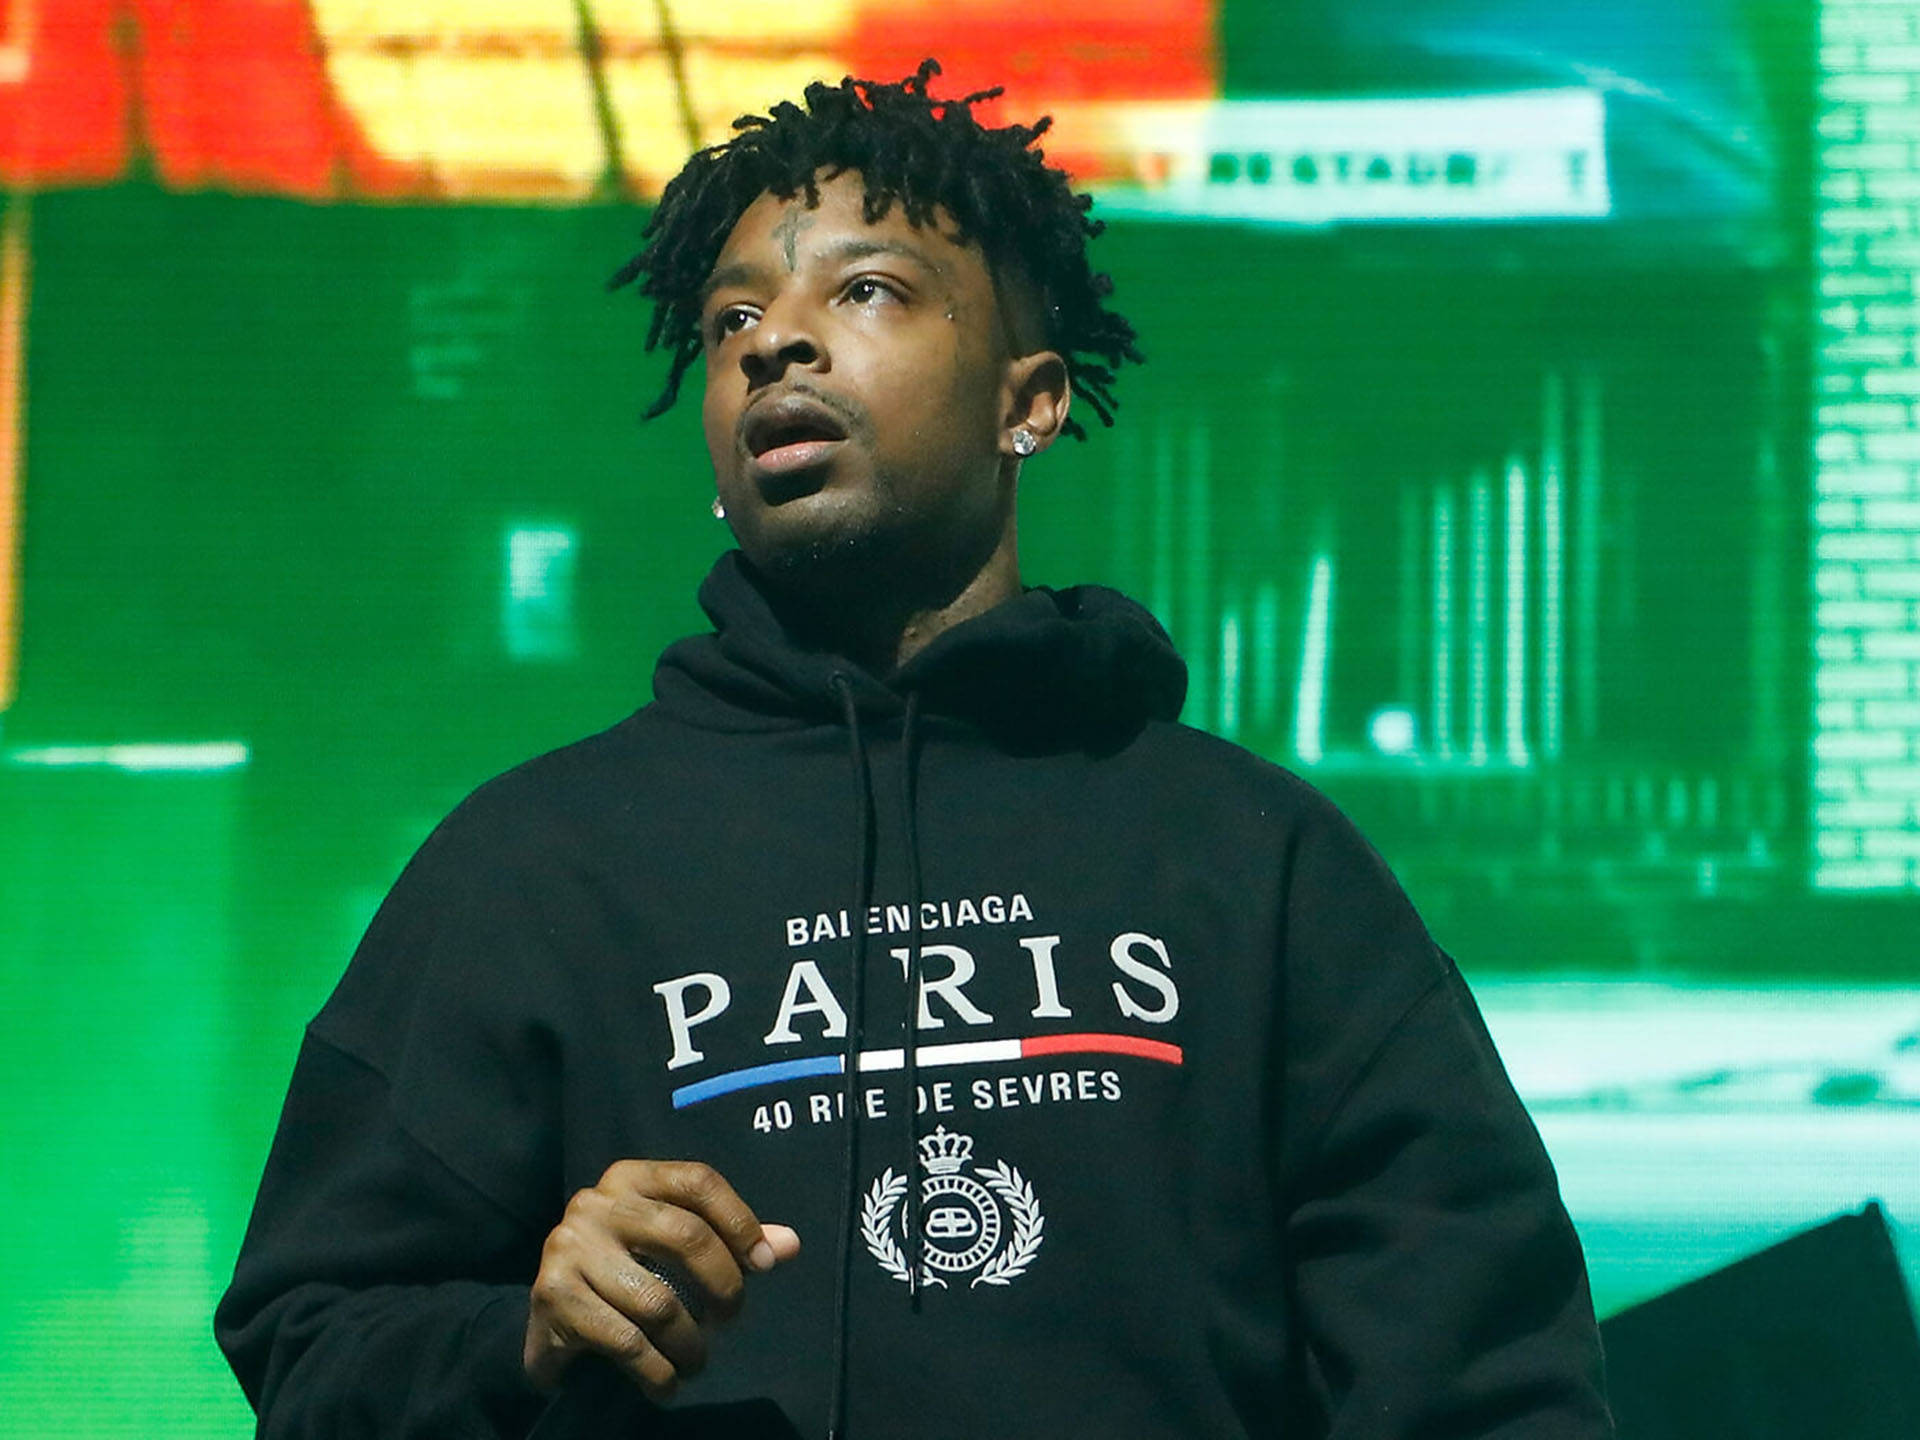 21 Savage Forbes Event Background